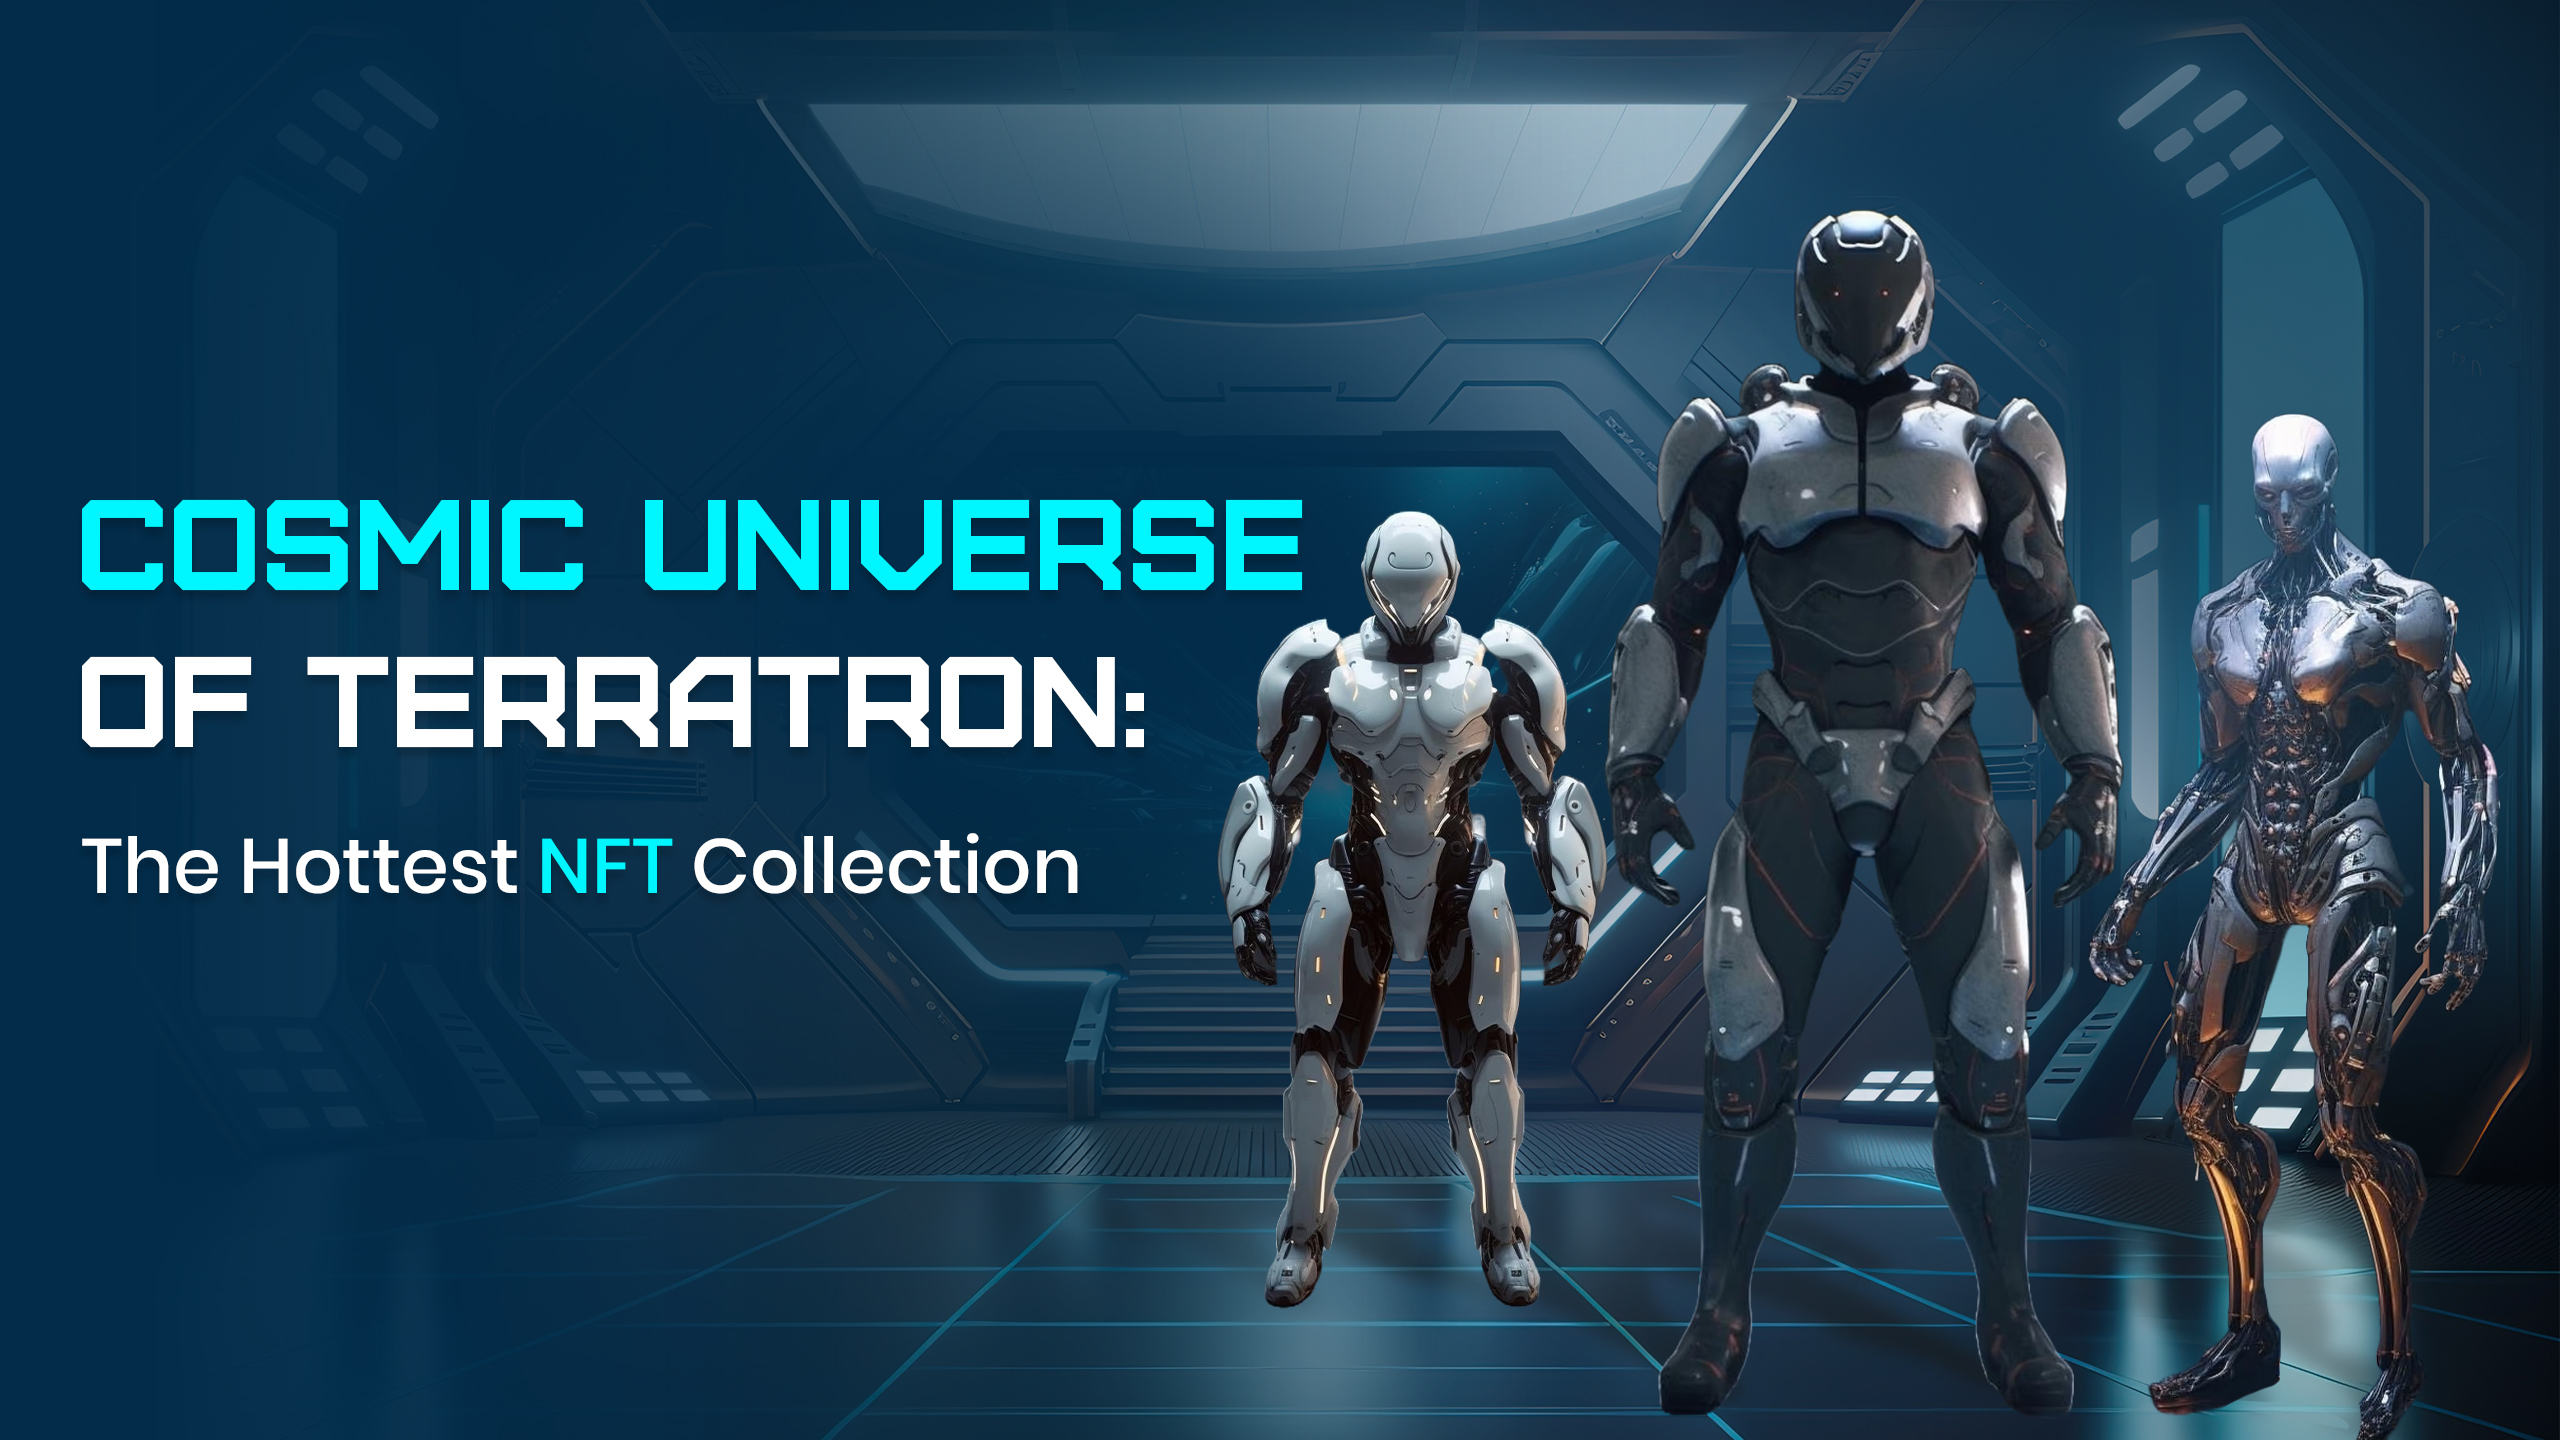 Top NFT Collections by Terratron